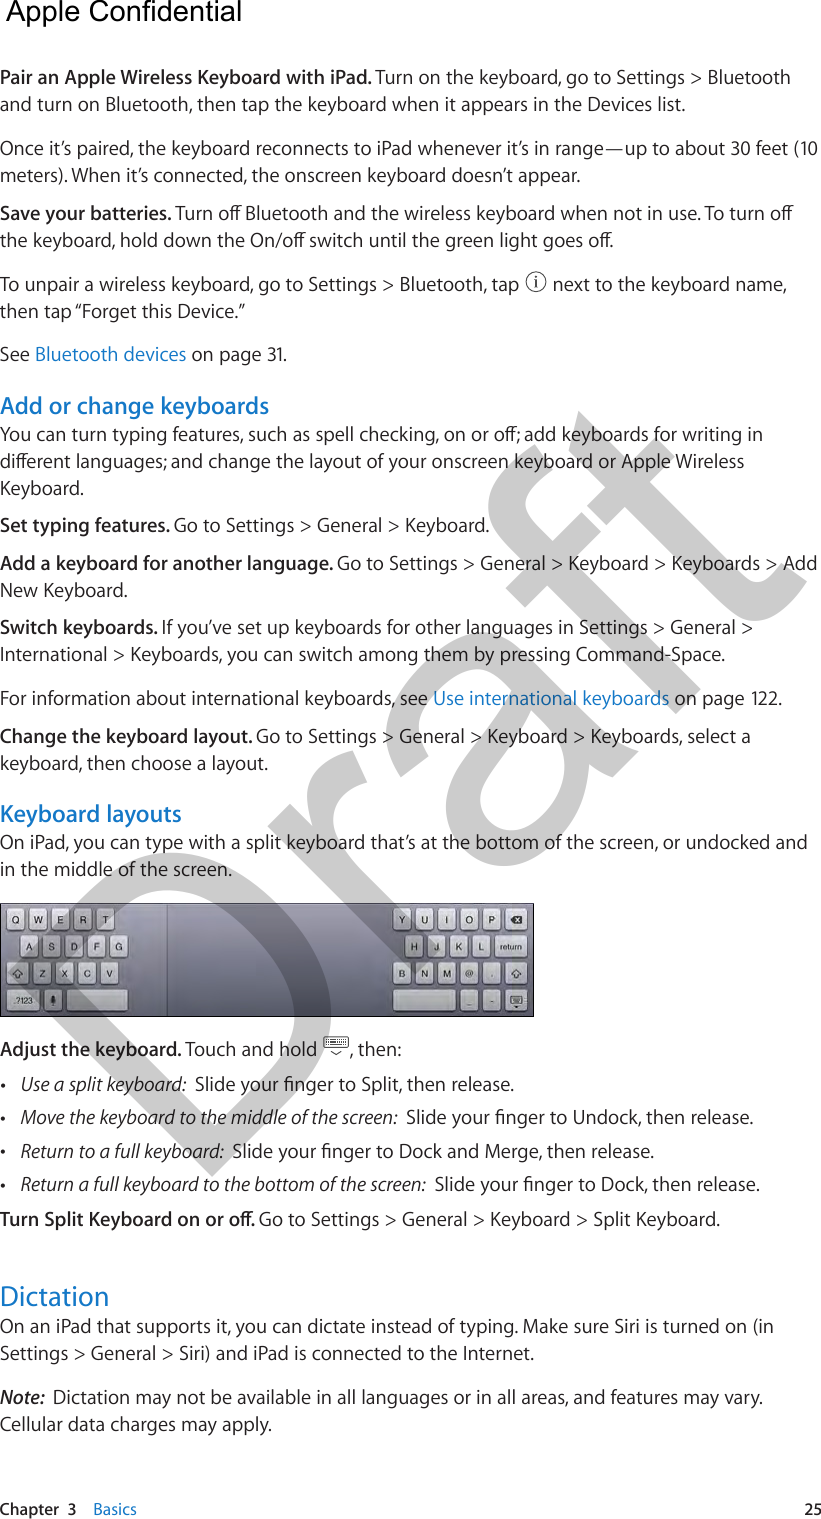 Chapter  3    Basics  25Pair an Apple Wireless Keyboard with iPad. Turn on the keyboard, go to Settings &gt; Bluetooth and turn on Bluetooth, then tap the keyboard when it appears in the Devices list.Once it’s paired, the keyboard reconnects to iPad whenever it’s in range—up to about 30 feet (10 meters). When it’s connected, the onscreen keyboard doesn’t appear.Save your batteries. To unpair a wireless keyboard, go to Settings &gt; Bluetooth, tap   next to the keyboard name, then tap “Forget this Device.”See Bluetooth devices on page 31.Add or change keyboardsKeyboard. Set typing features. Go to Settings &gt; General &gt; Keyboard. Add a keyboard for another language. Go to Settings &gt; General &gt; Keyboard &gt; Keyboards &gt; Add New Keyboard.Switch keyboards. If you’ve set up keyboards for other languages in Settings &gt; General &gt; International &gt; Keyboards, you can switch among them by pressing Command-Space.For information about international keyboards, see Use international keyboards on page 122.Change the keyboard layout. Go to Settings &gt; General &gt; Keyboard &gt; Keyboards, select a keyboard, then choose a layout. Keyboard layoutsOn iPad, you can type with a split keyboard that’s at the bottom of the screen, or undocked and in the middle of the screen. Adjust the keyboard. Touch and hold  , then: •Use a split keyboard:  •Move the keyboard to the middle of the screen:  •Return to a full keyboard:  •Return a full keyboard to the bottom of the screen: Go to Settings &gt; General &gt; Keyboard &gt; Split Keyboard.DictationOn an iPad that supports it, you can dictate instead of typing. Make sure Siri is turned on (in Settings &gt; General &gt; Siri) and iPad is connected to the Internet.Note:  Dictation may not be available in all languages or in all areas, and features may vary. Cellular data charges may apply.  Apple Confidential Draft